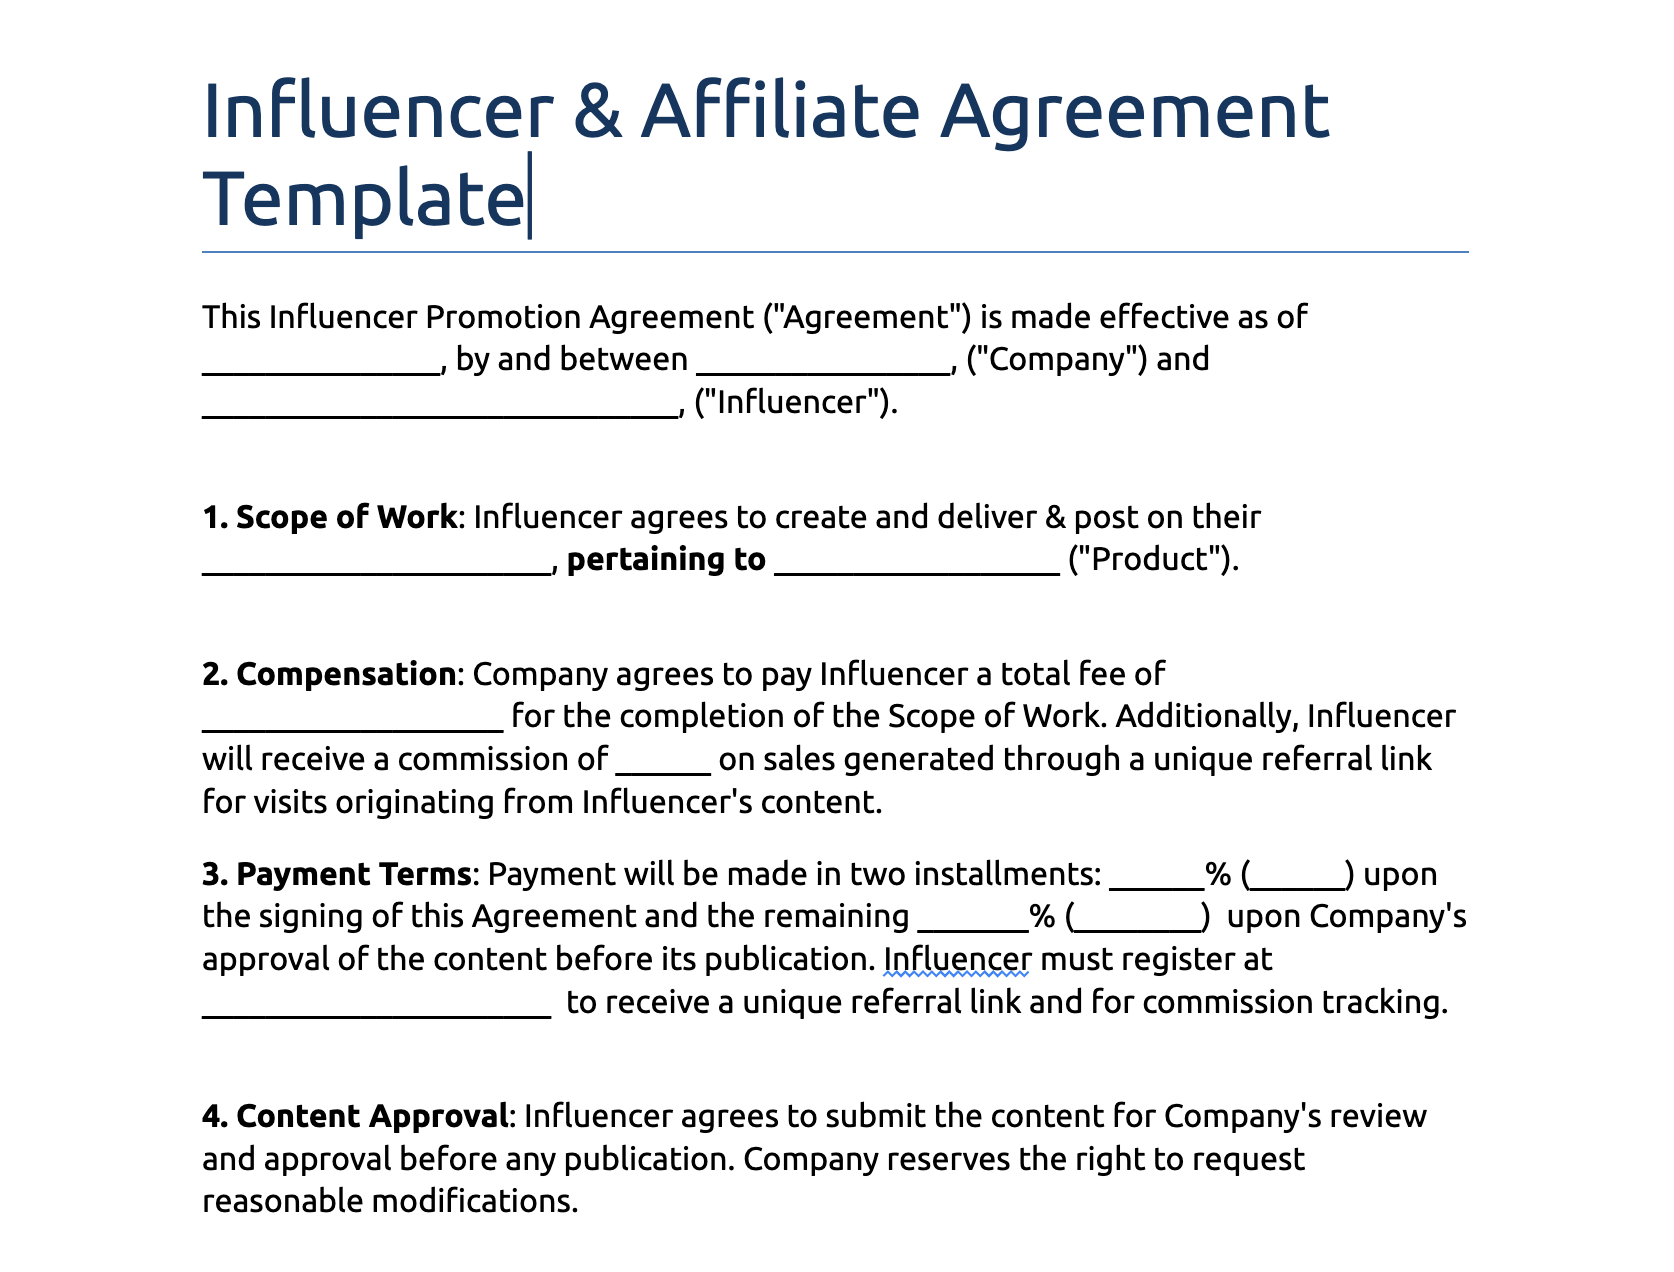 Influencer & Affiliate Agreement Template